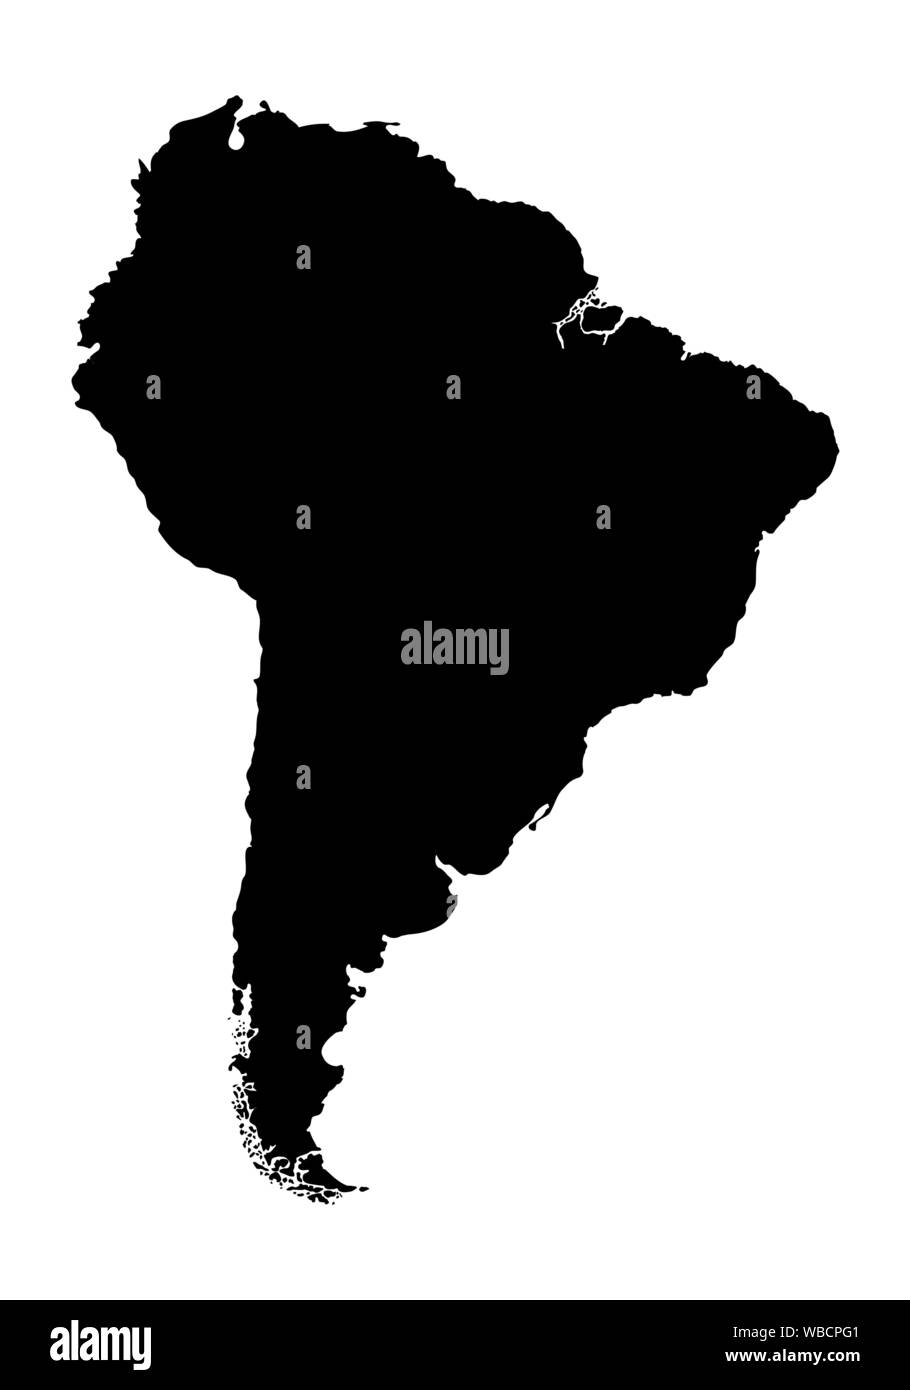 South America dark silhouette map isolated on white background Stock Vector